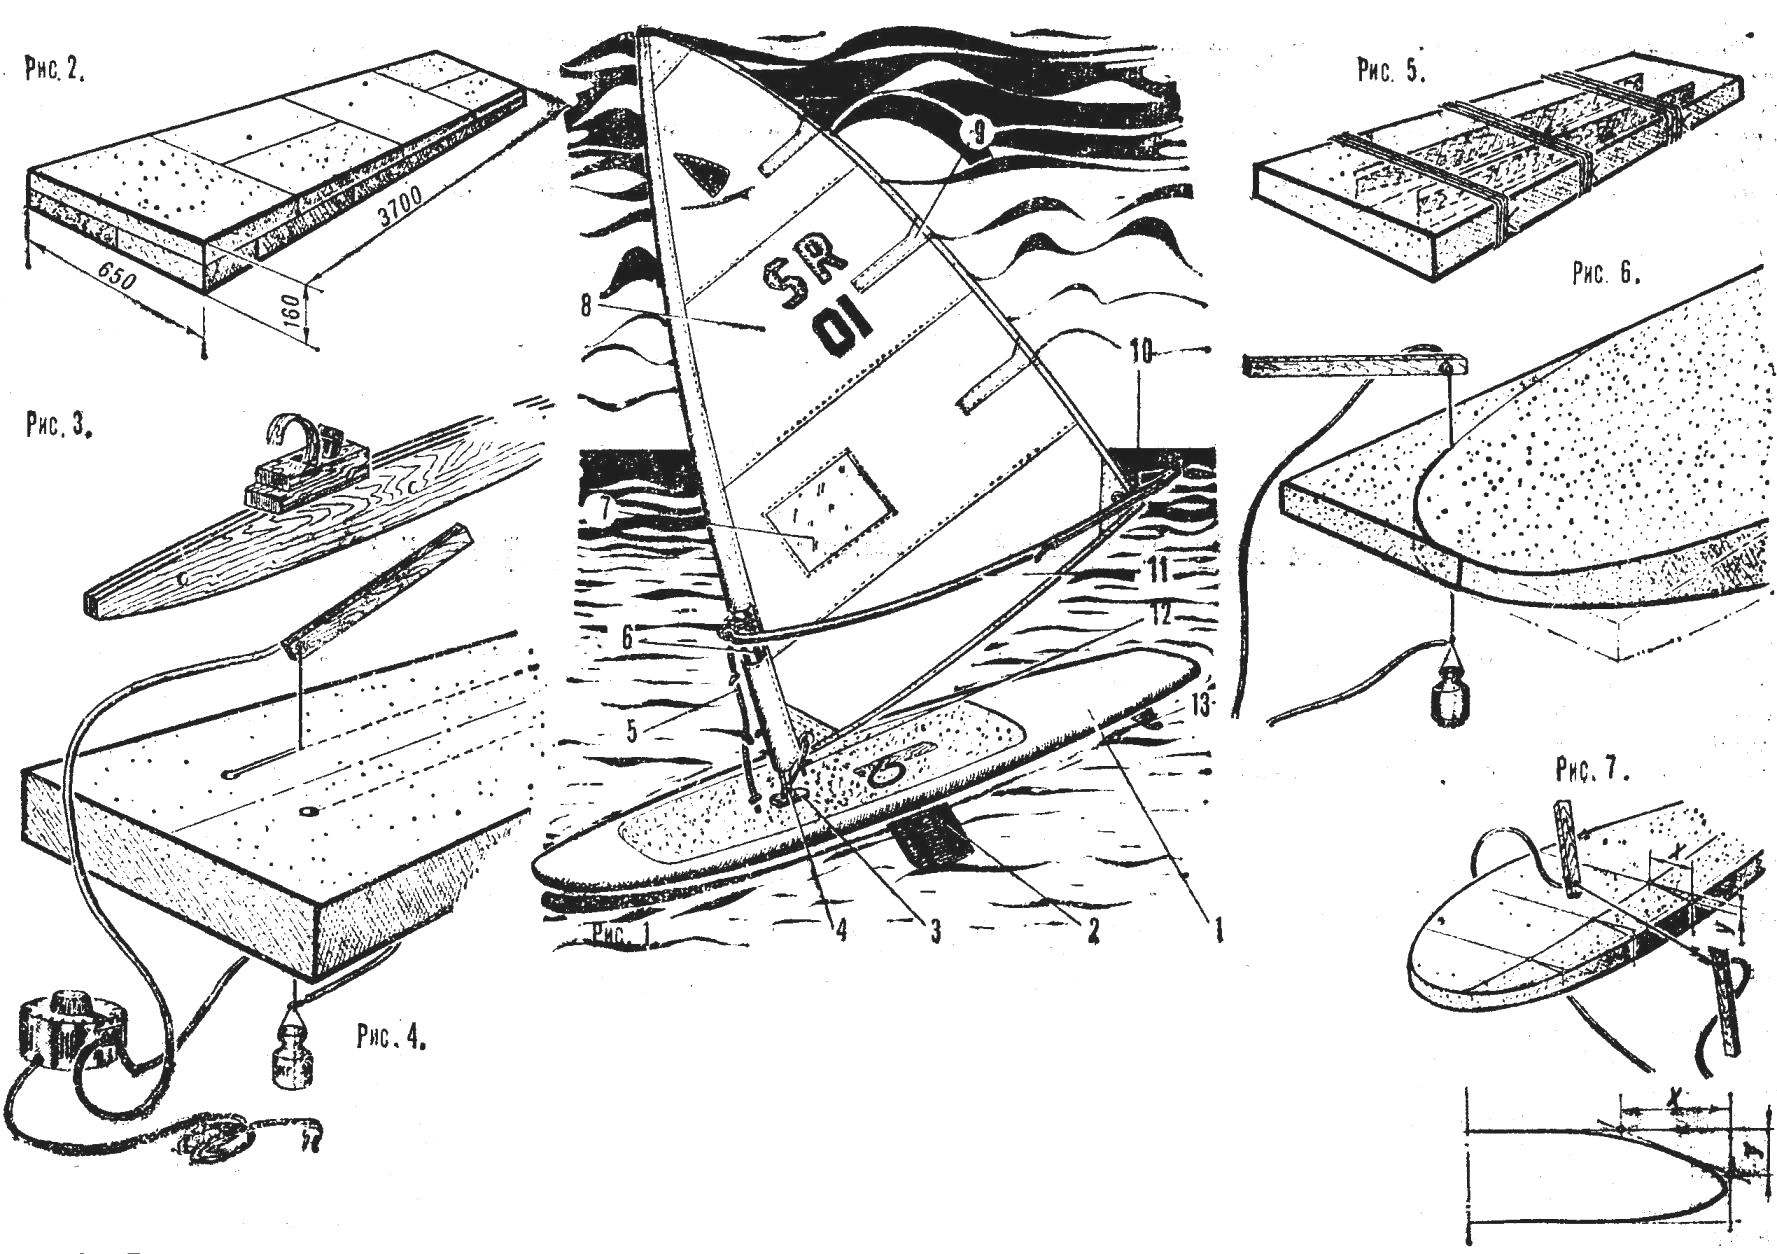 The layout of the windsurfer